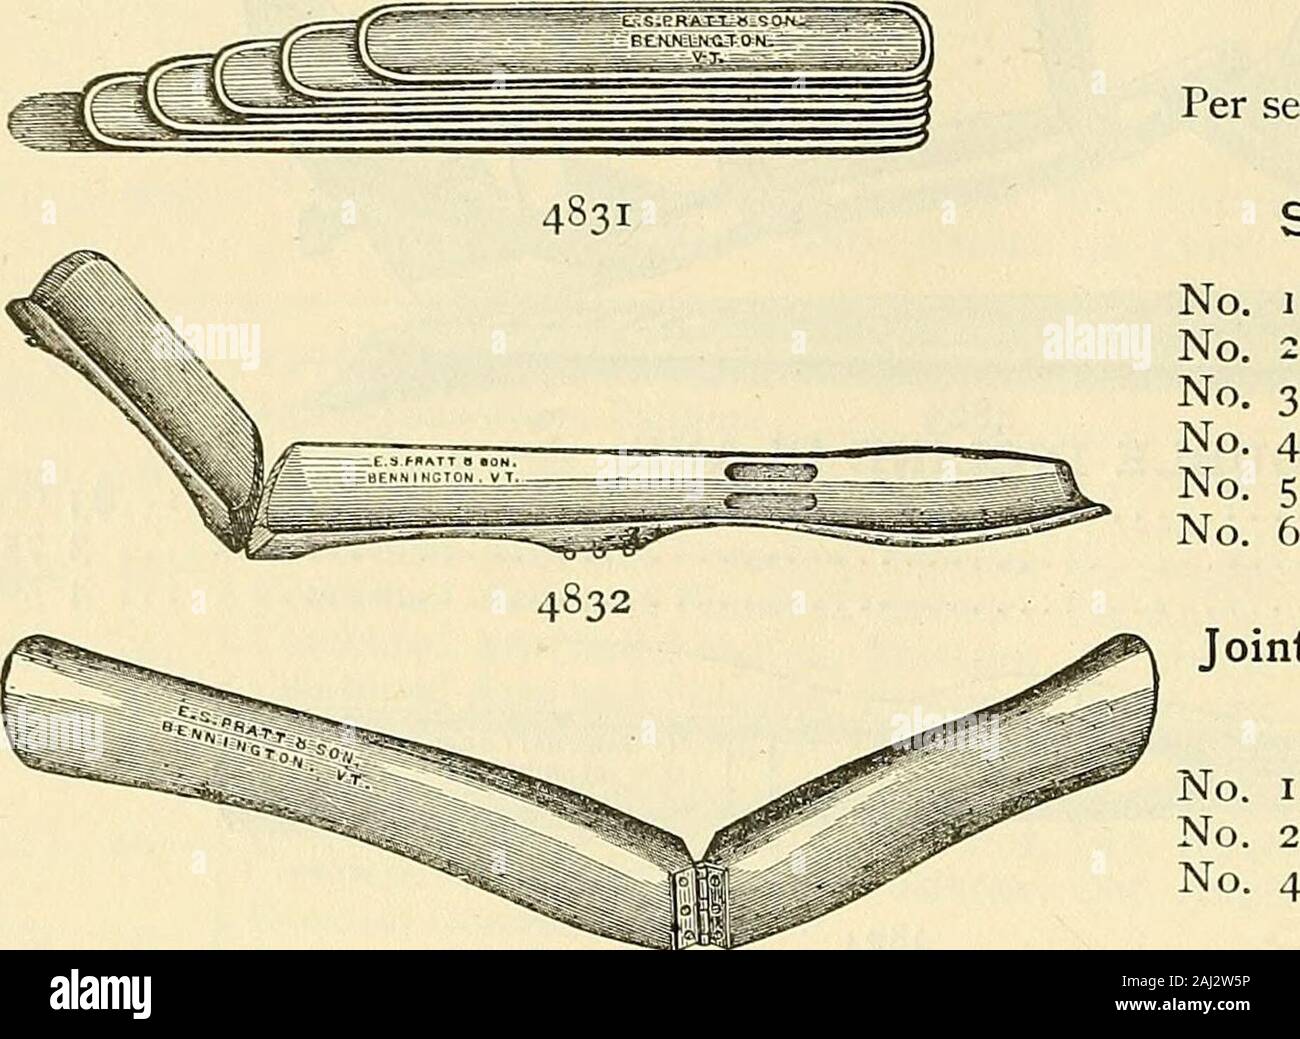 Catalogue of Sharp & Smith : importers, manufacturers, wholesale and retail dealers in surgical instruments, deformity apparatus, artificial limbs, artificial eyes, elastic stockings, trusses, crutches, supporters, galvanic and faradic batteries, etc., surgeons' appliances of every description . 4829Joint Arm Splint.—With Screw. No. I |i 50 No. 2 I 70 No. 3 I 85 4830Condyle and Humerus Splint. No. I $0 60 No. 2 , o 80 No. 3 o 95 784 SHARP & SMITH, CHICAGO. SPLINTS. DAYS OR PRATTS CARVED WOOD. Dressing Splints.Per set of five $ 40. Squires Forearm Splint. No.No. No.No.No.No. COID20 304050 Joint Stock Photo